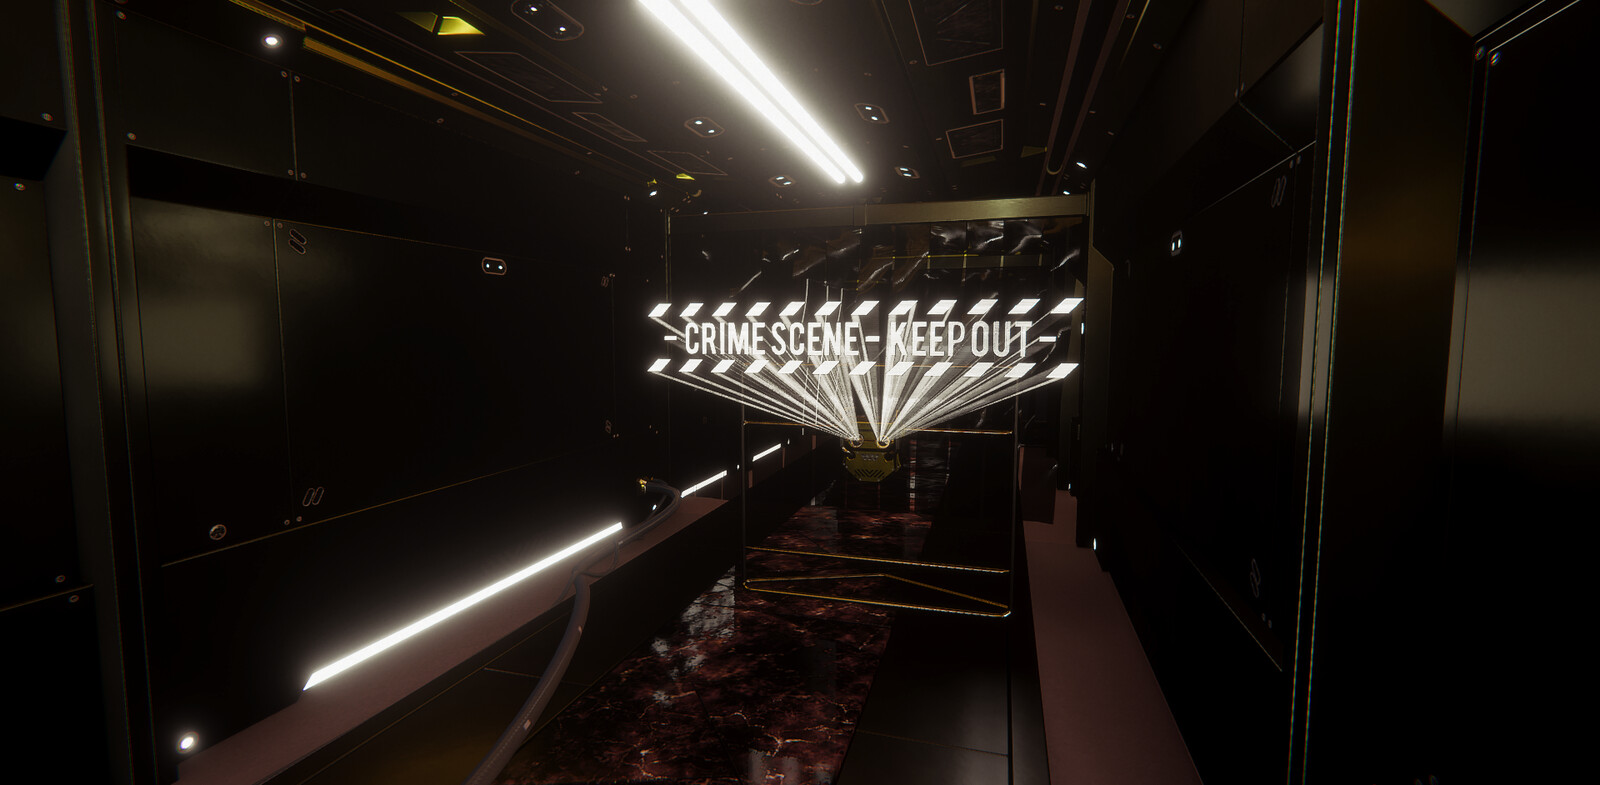 Scene is lighten mostly by Emission information in shaders and materials baked in to reflection spheres.